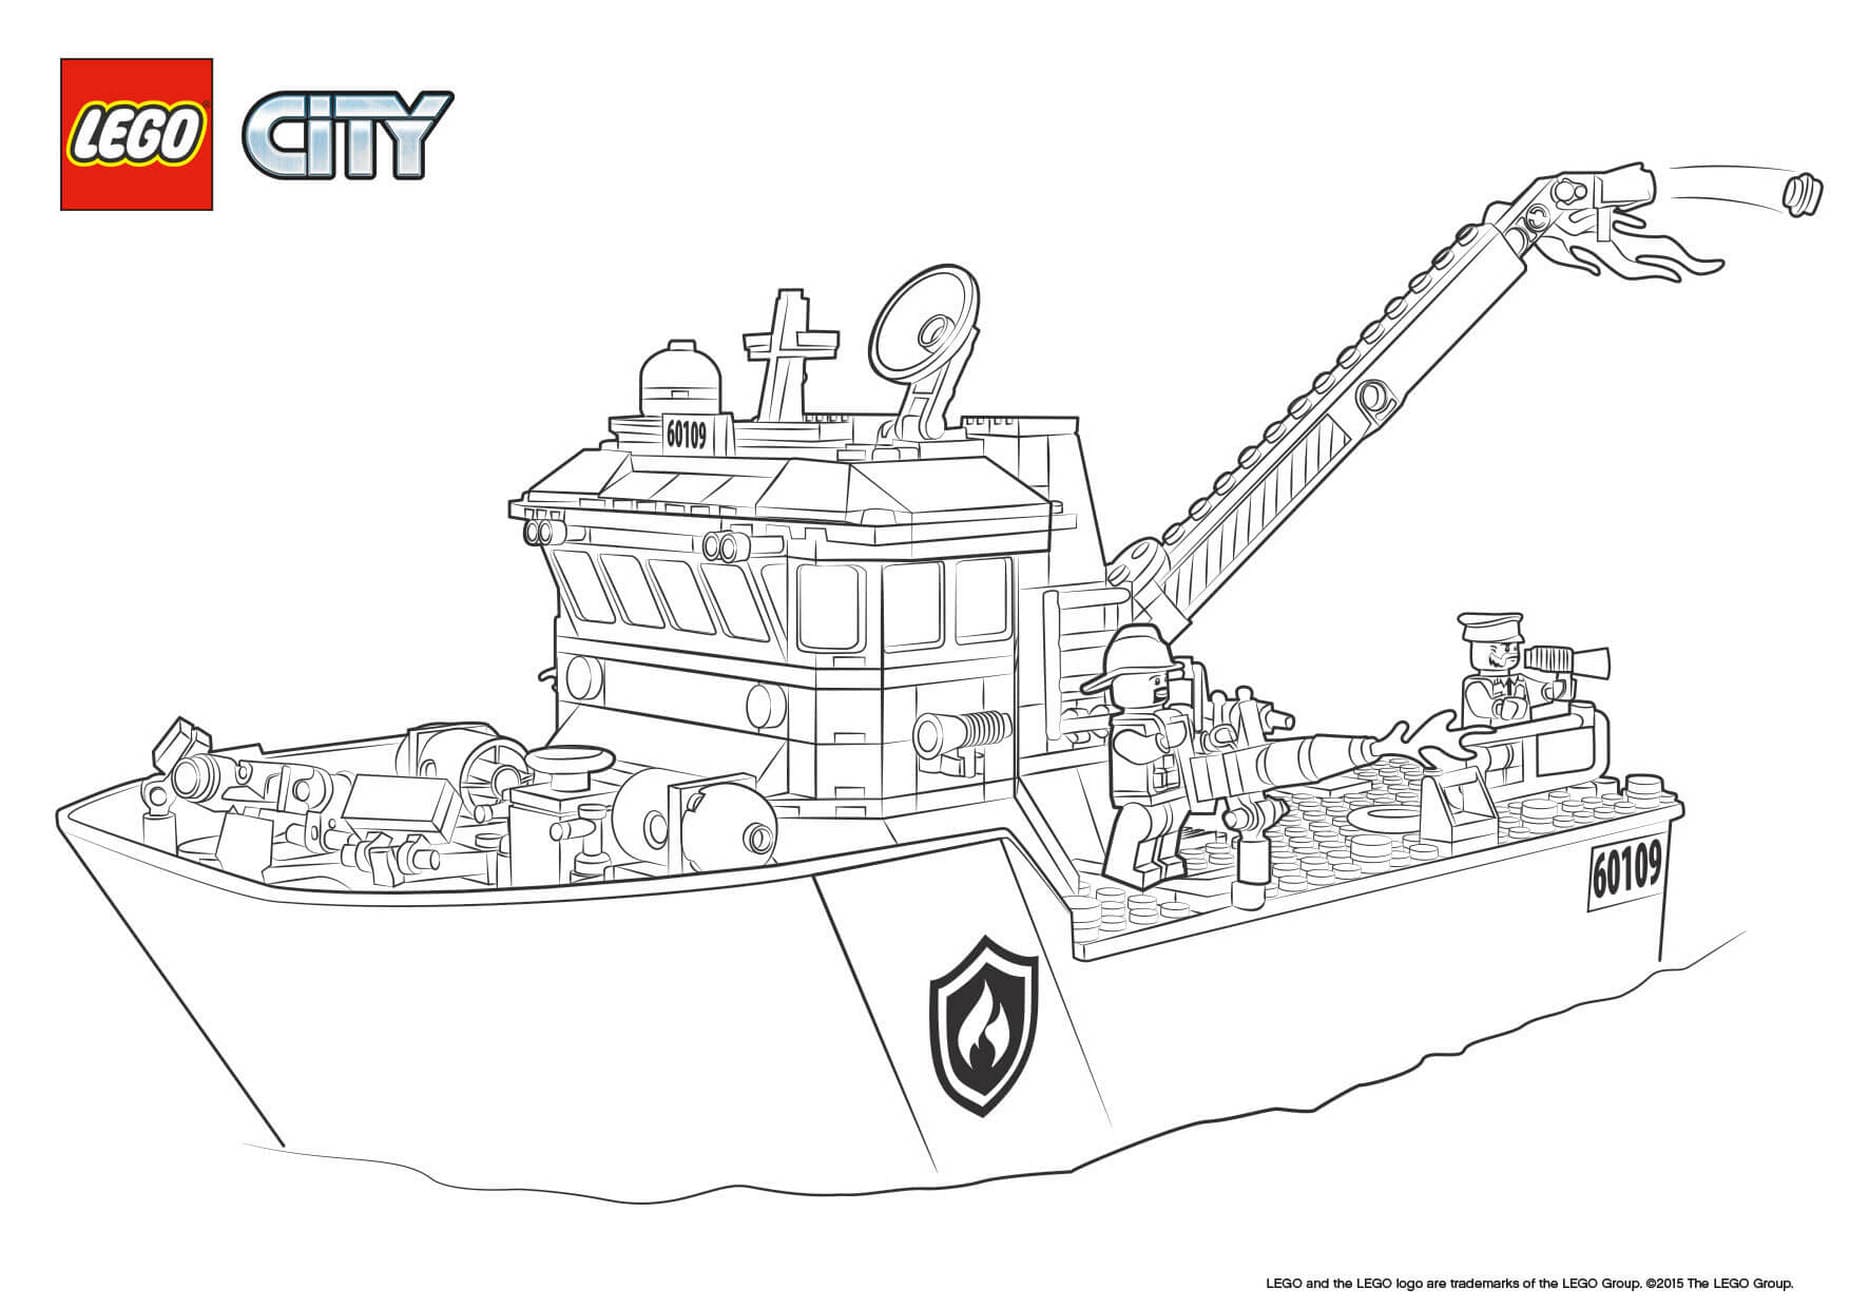 Live lego city coloring page